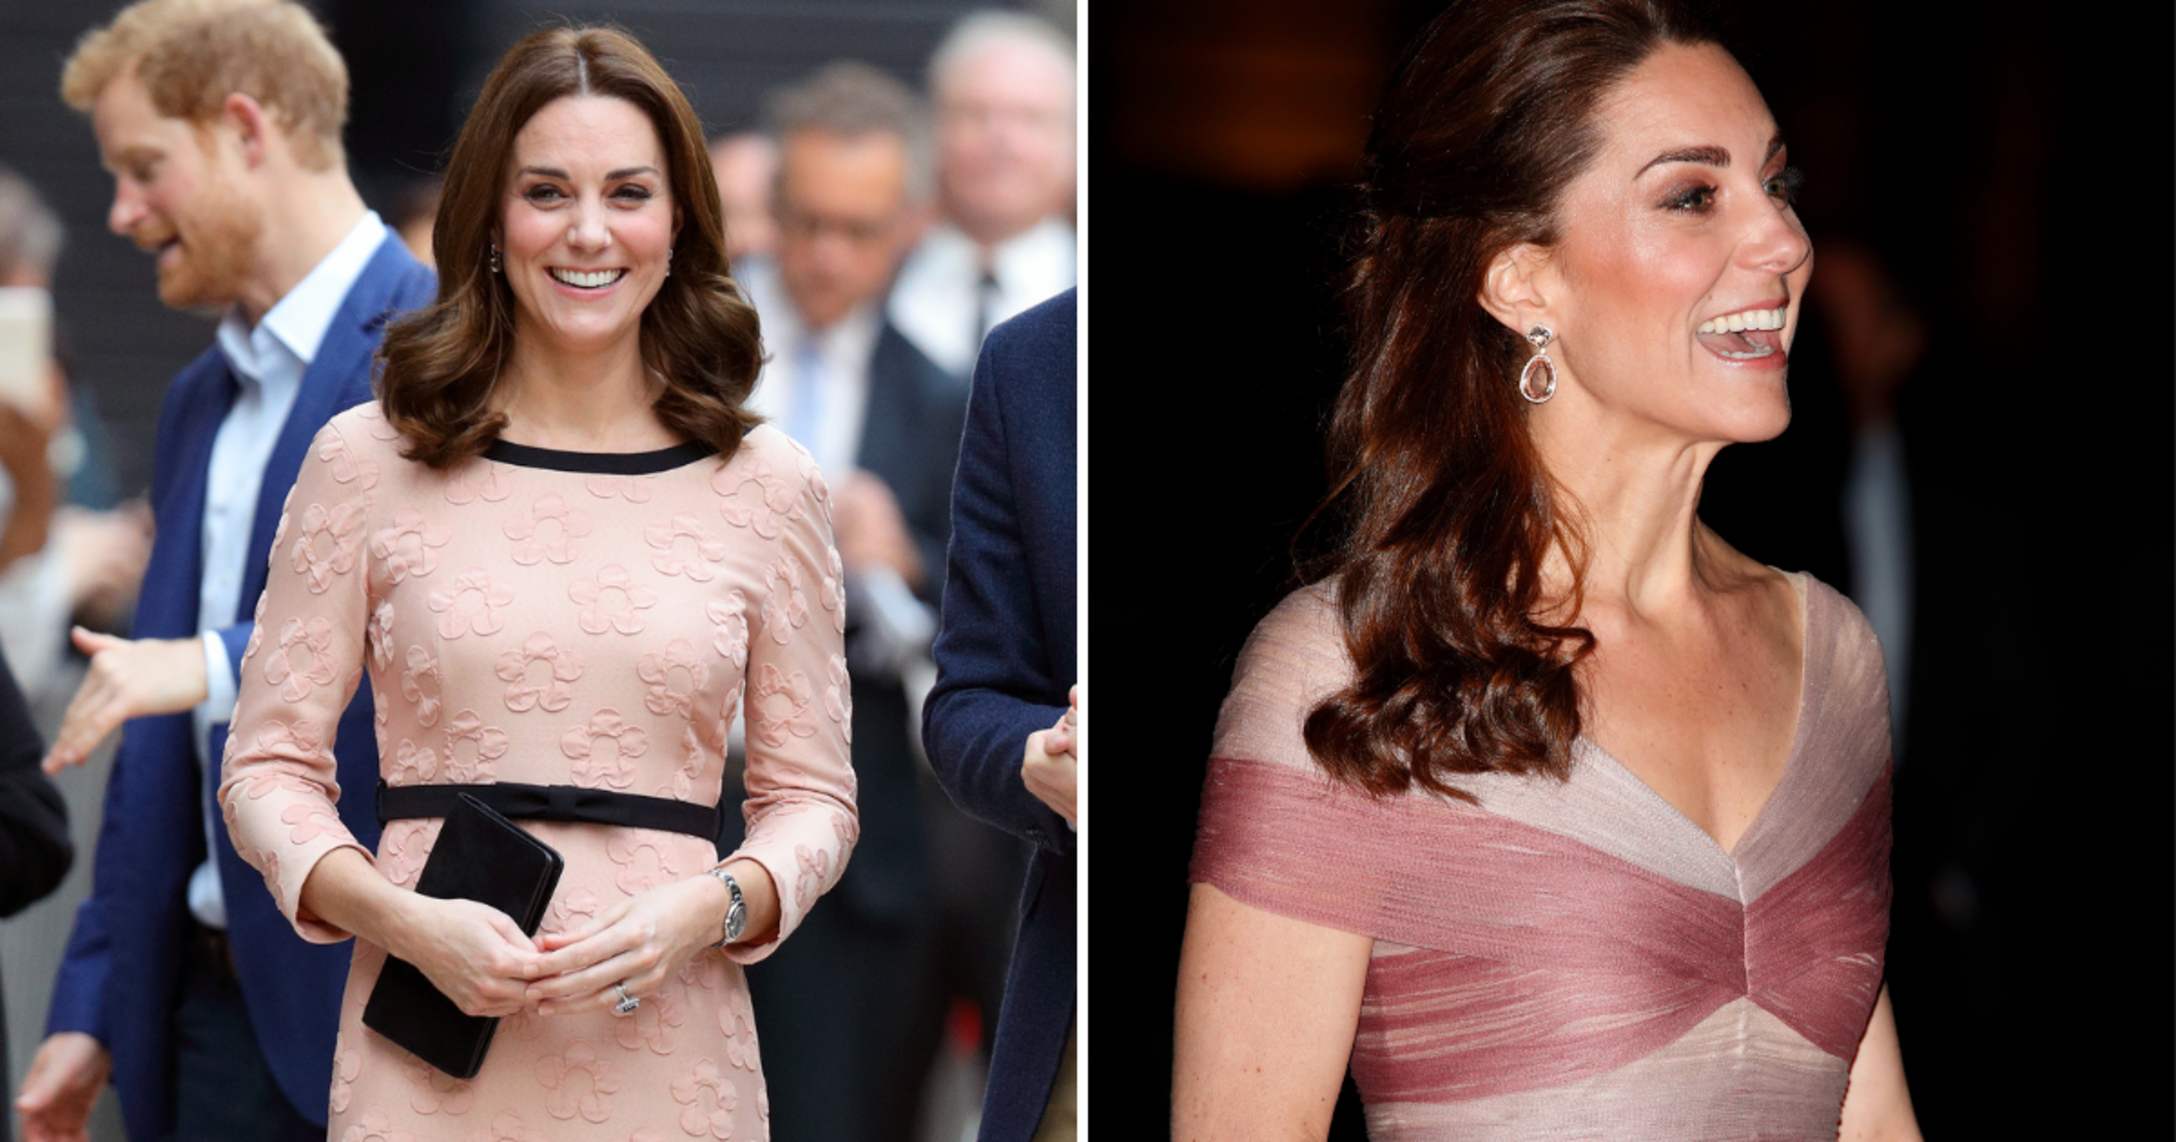 Kate Middleton Looks Stunning in Gorgeous Gucci Look!: Photo